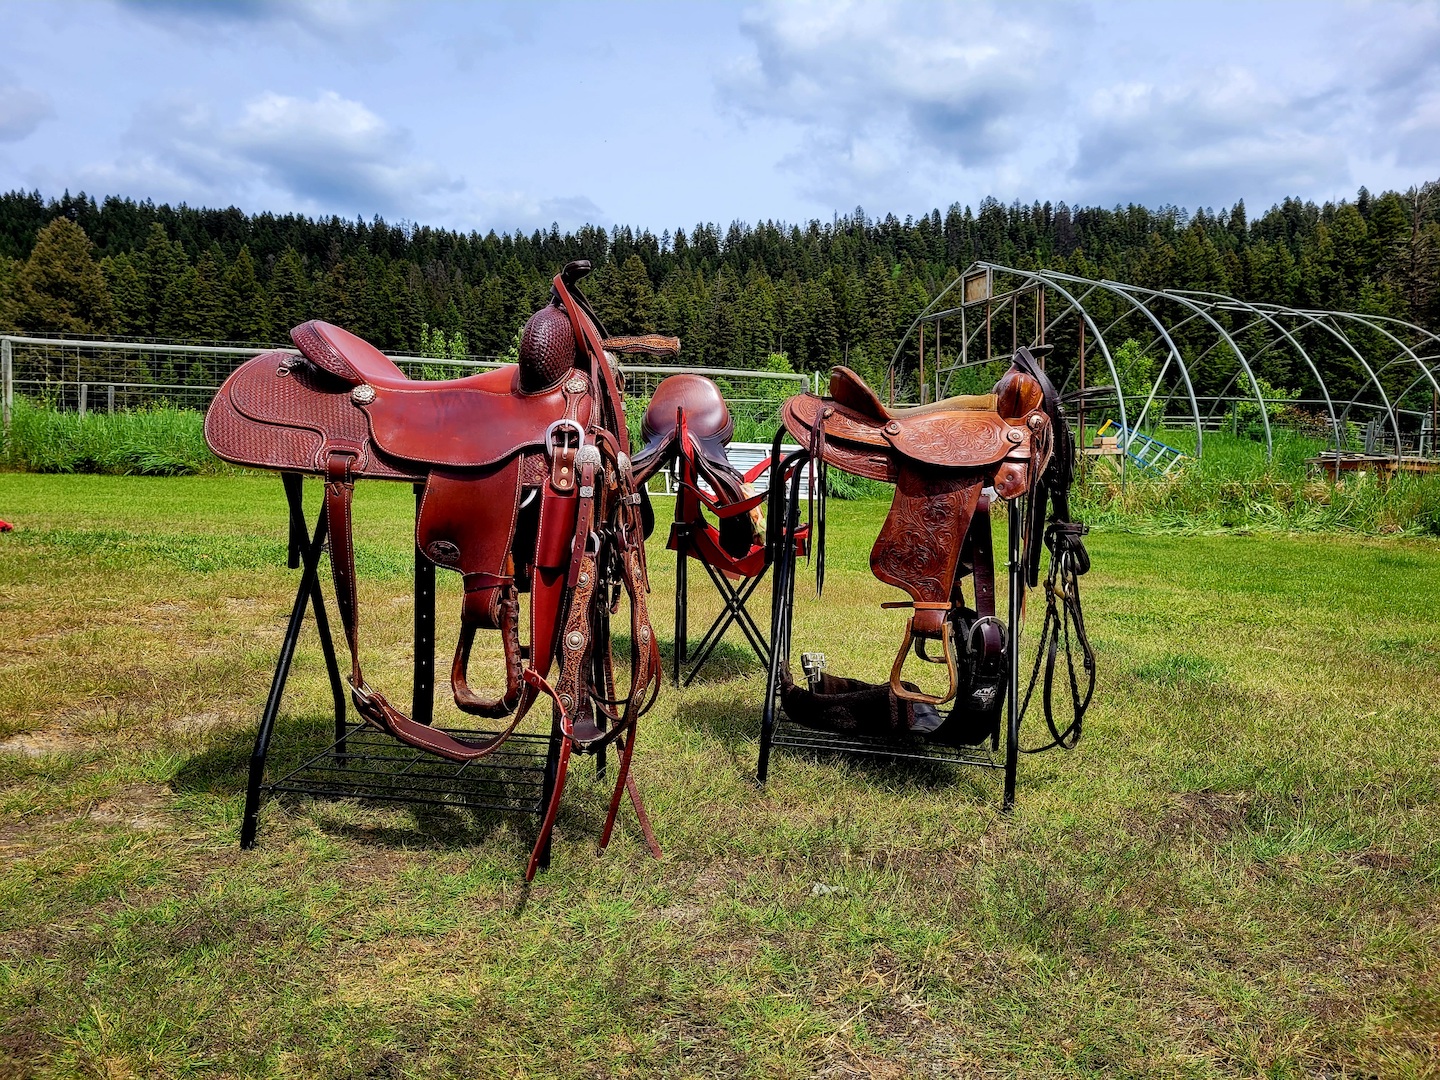 photo of three saddles on racks, on a lawn, being oiled and cleaned on a sunny day